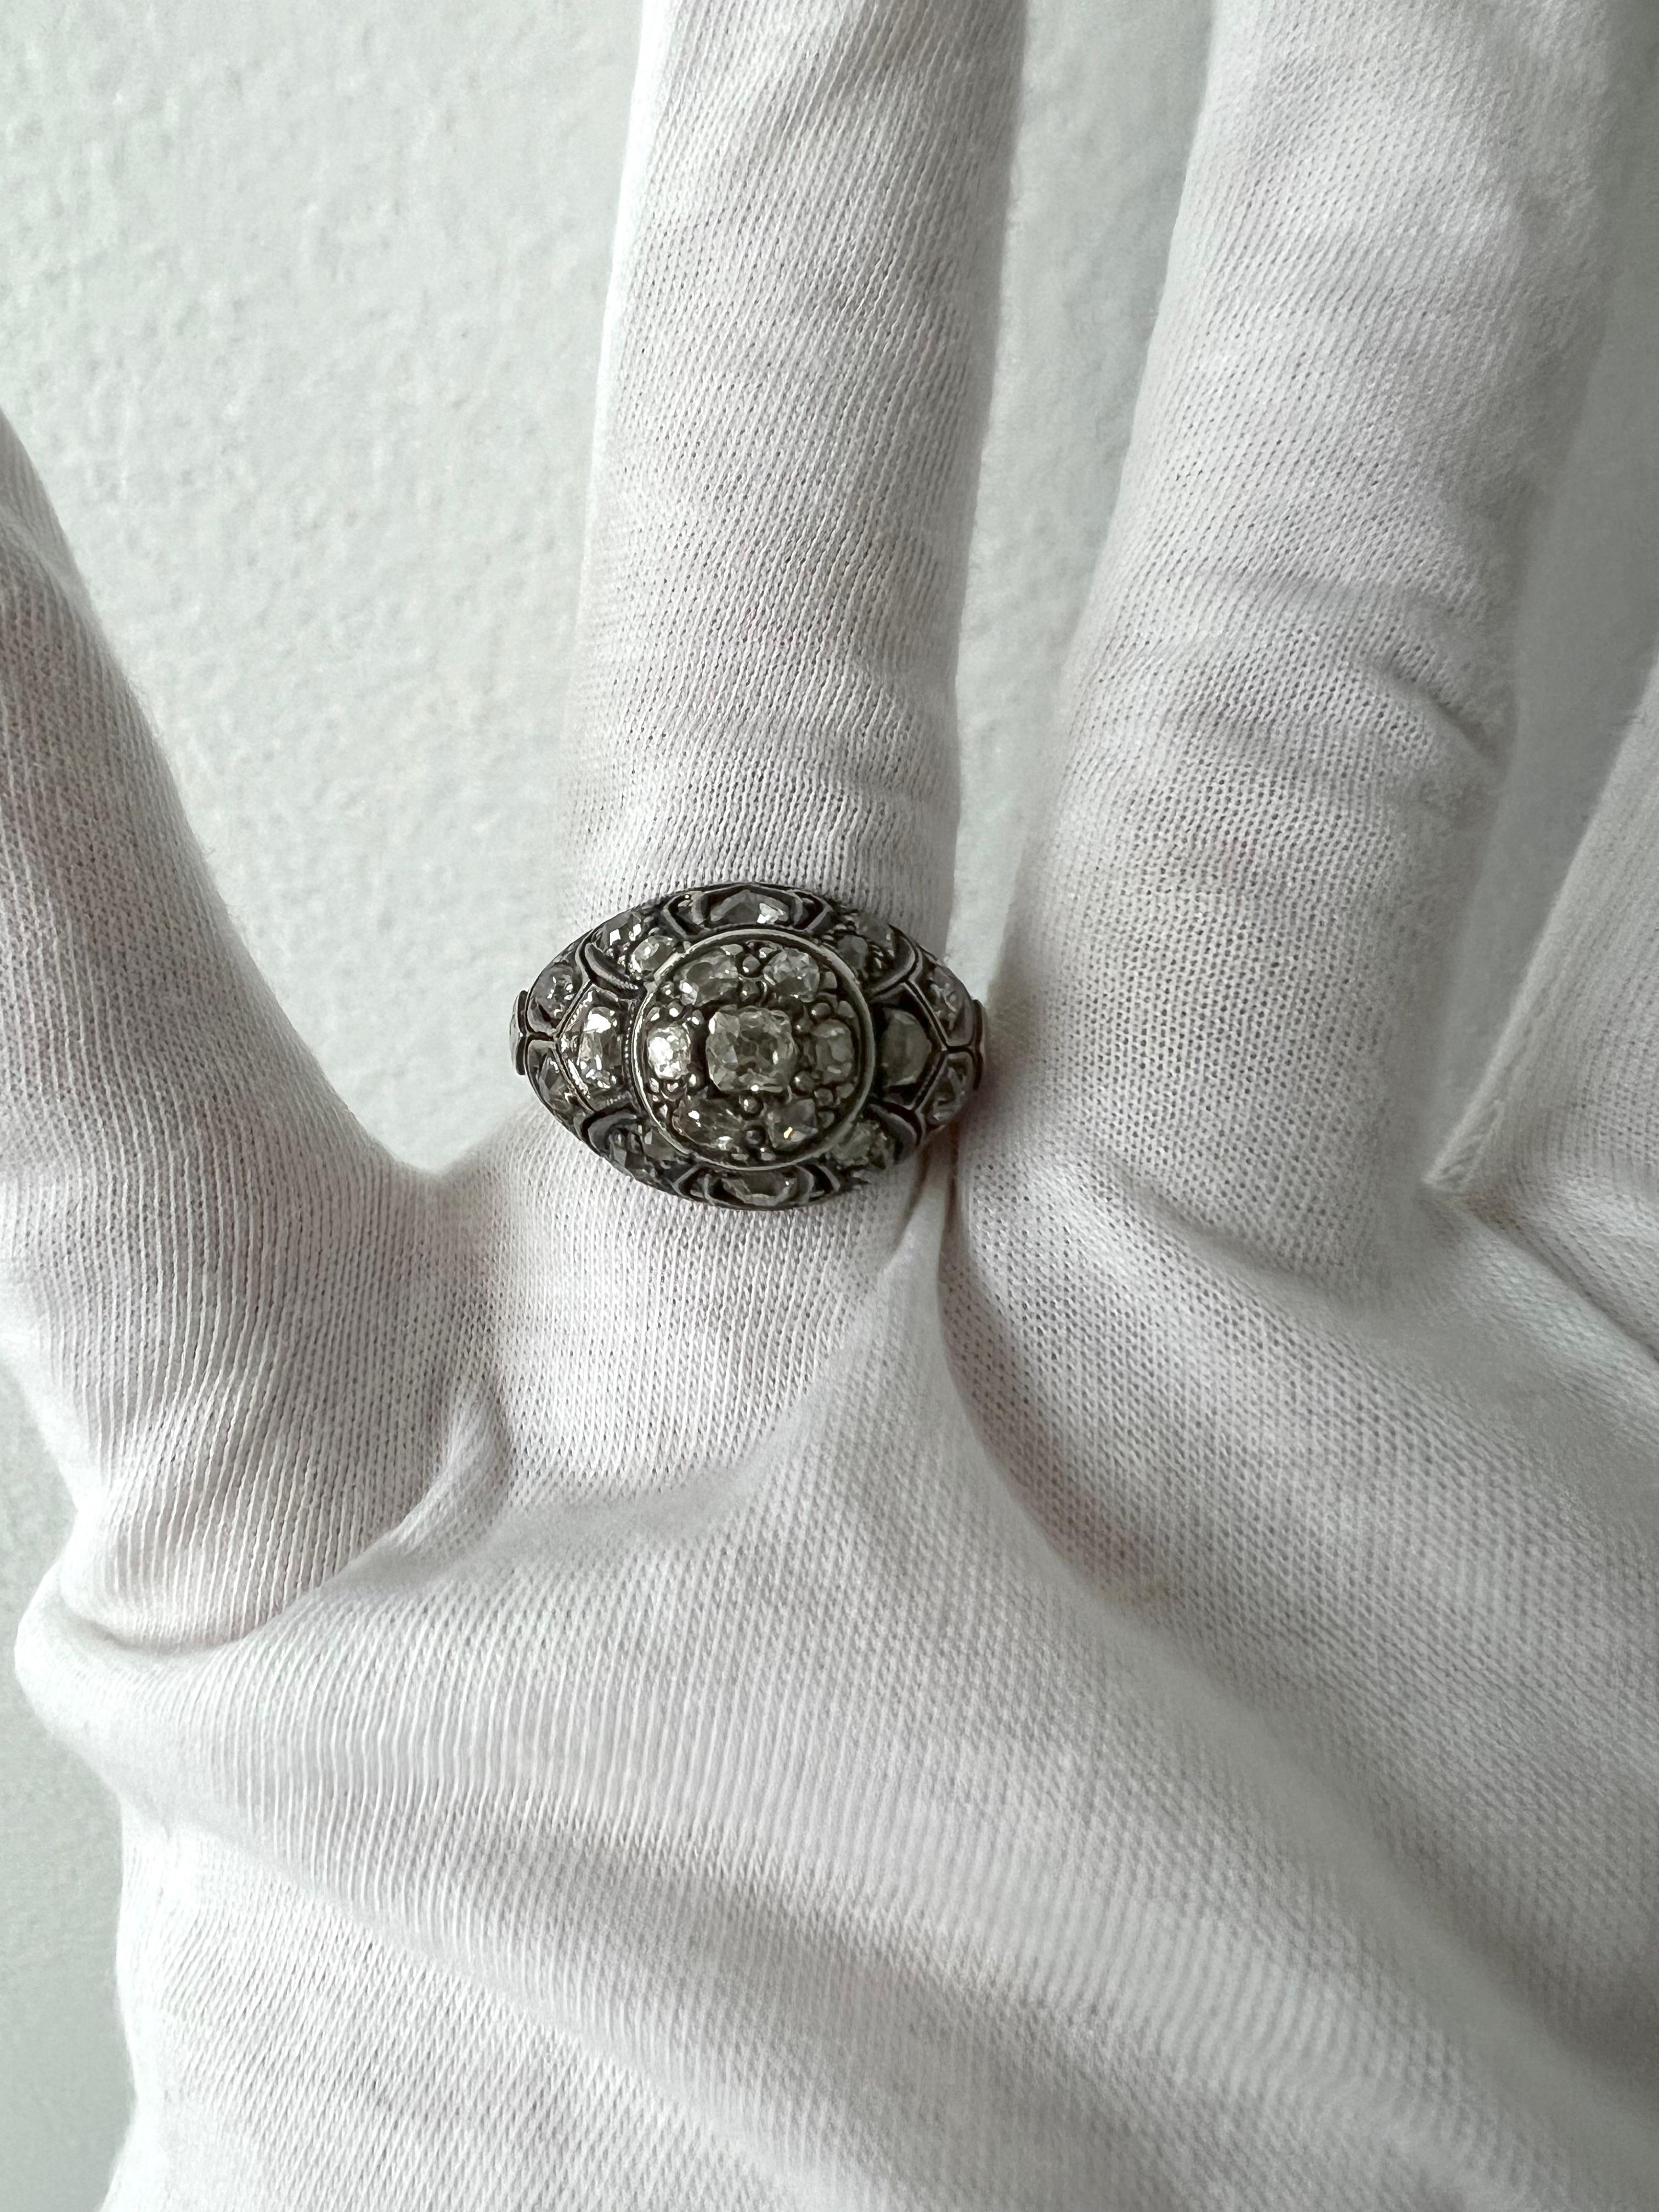 Old Mine Cut Antique Silver topped Gold Diamond Ring Engagement Ring. For Sale